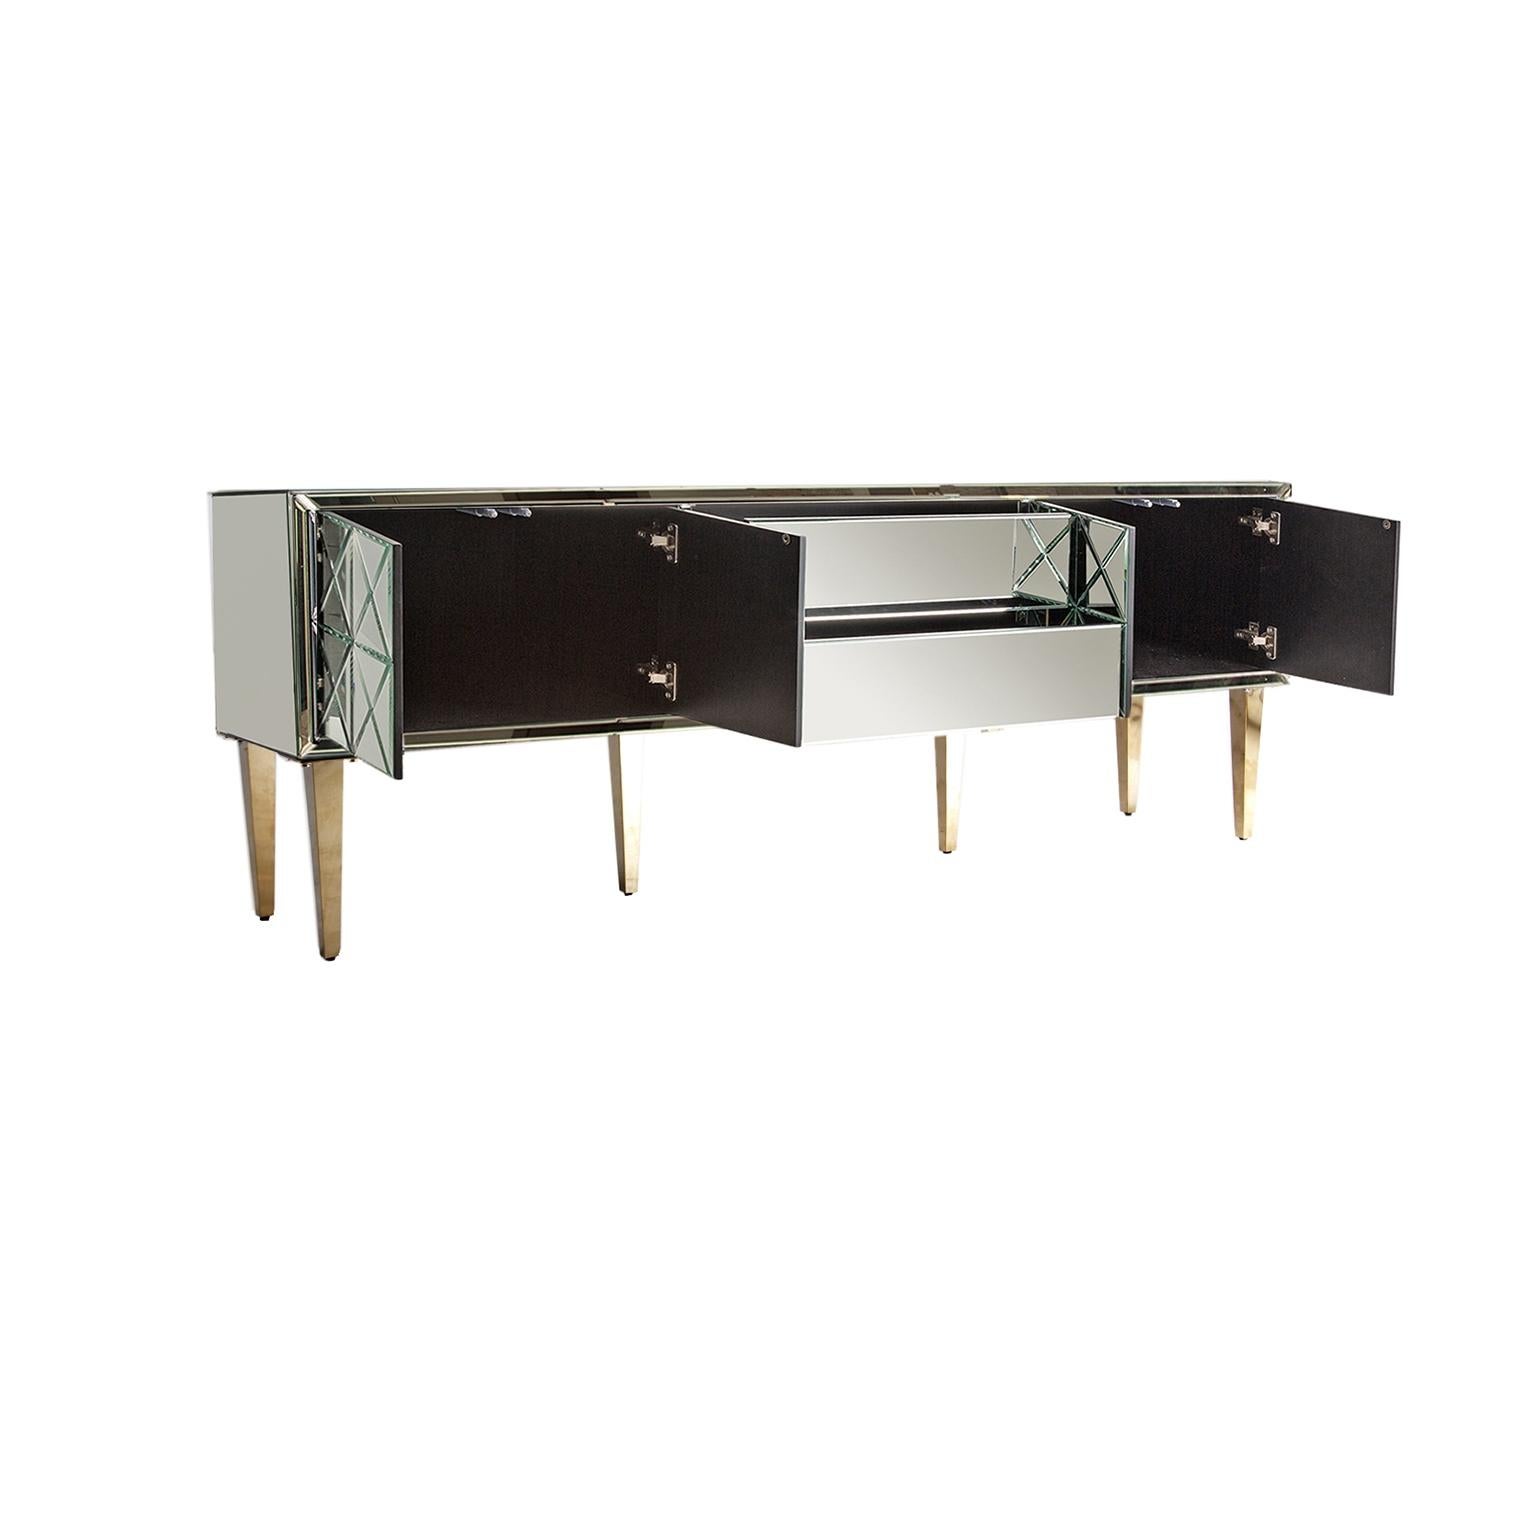 Sparkling and sophisticated mirrored sideboard with aerial gold metal feet four mirrored doors that and 2 central drawers.